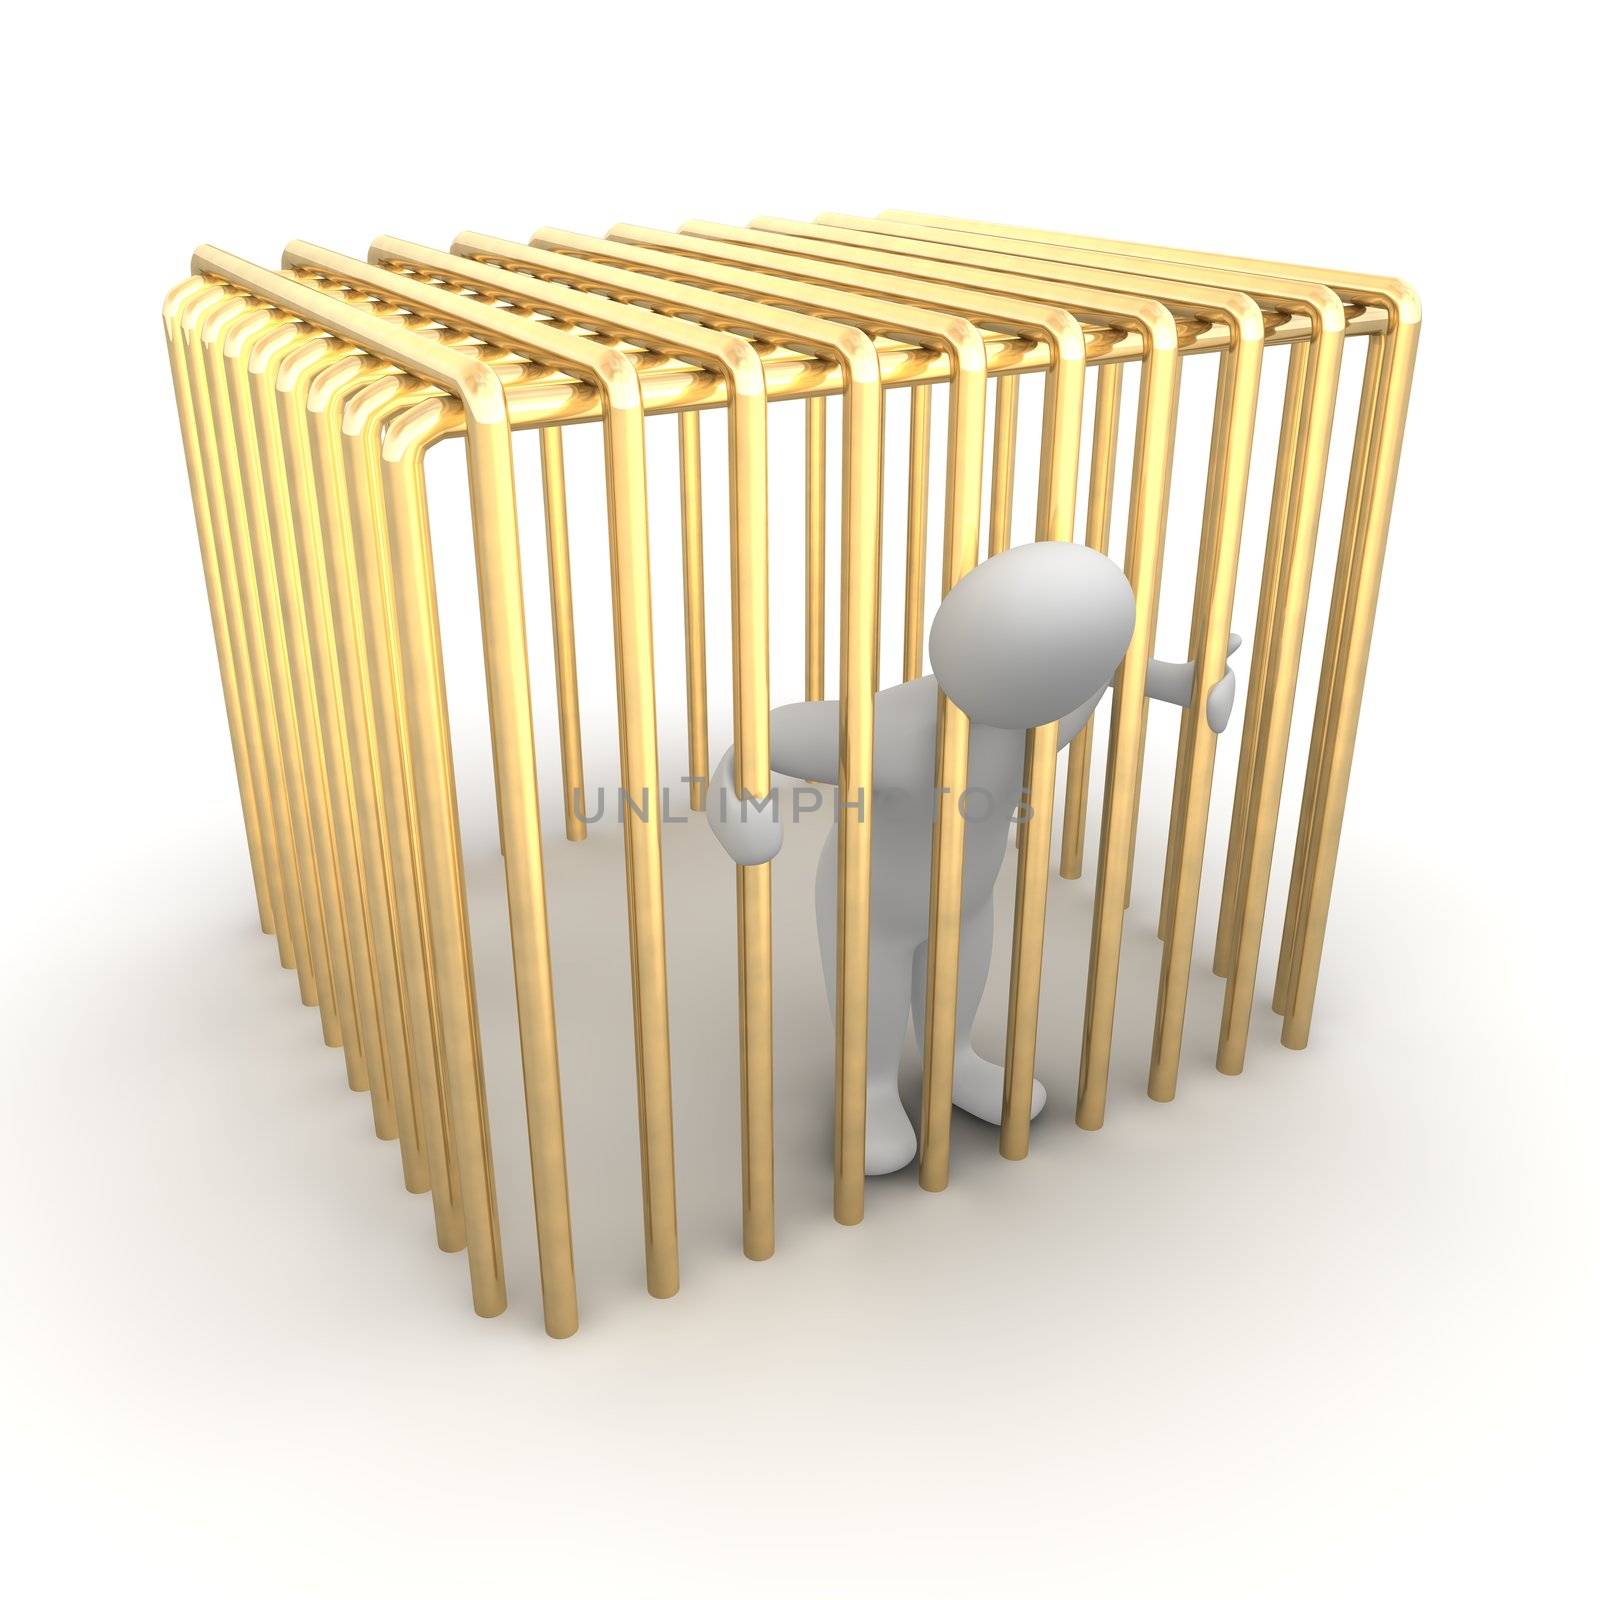 Man in golden cage by skvoor